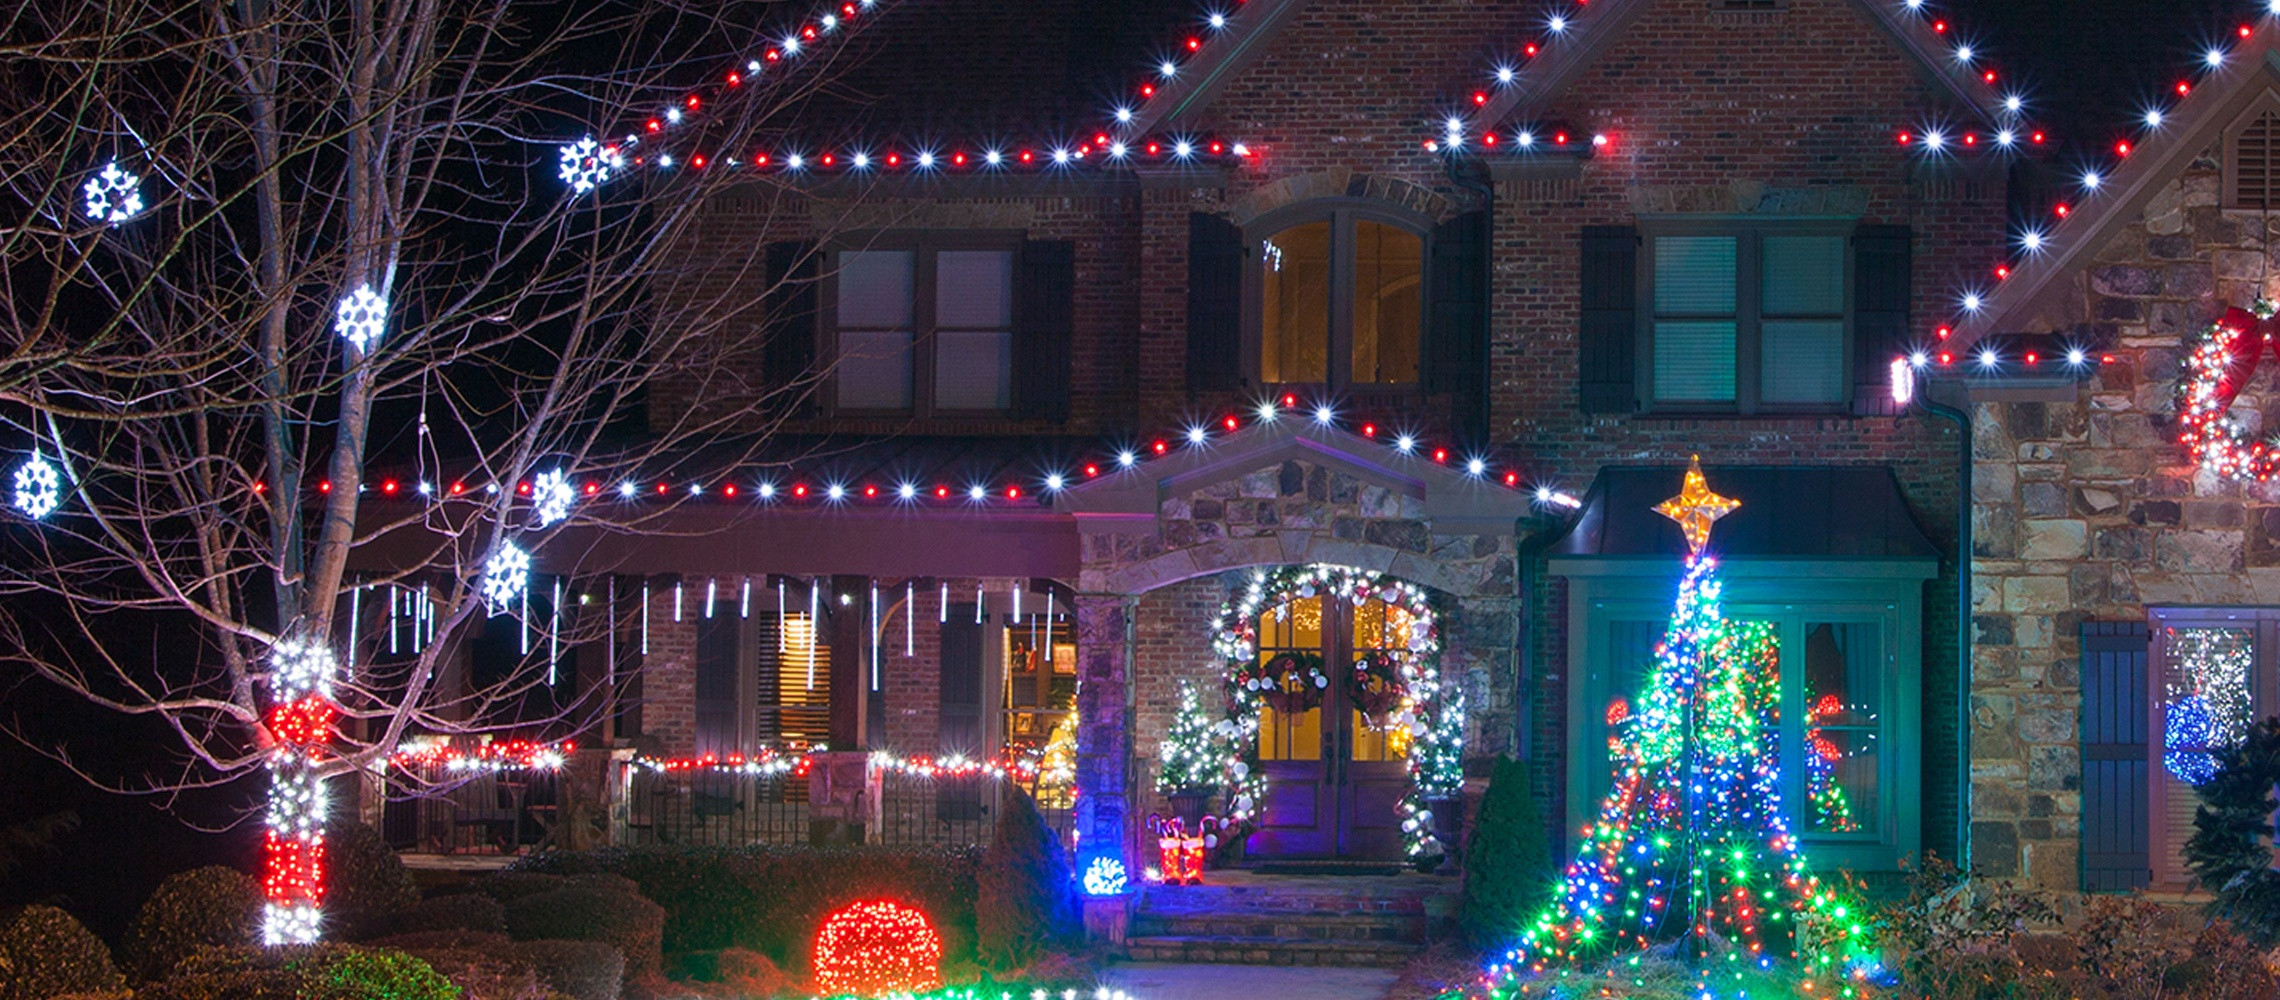 Porch Christmas Lights
 Outdoor Christmas Lights Ideas For The Roof